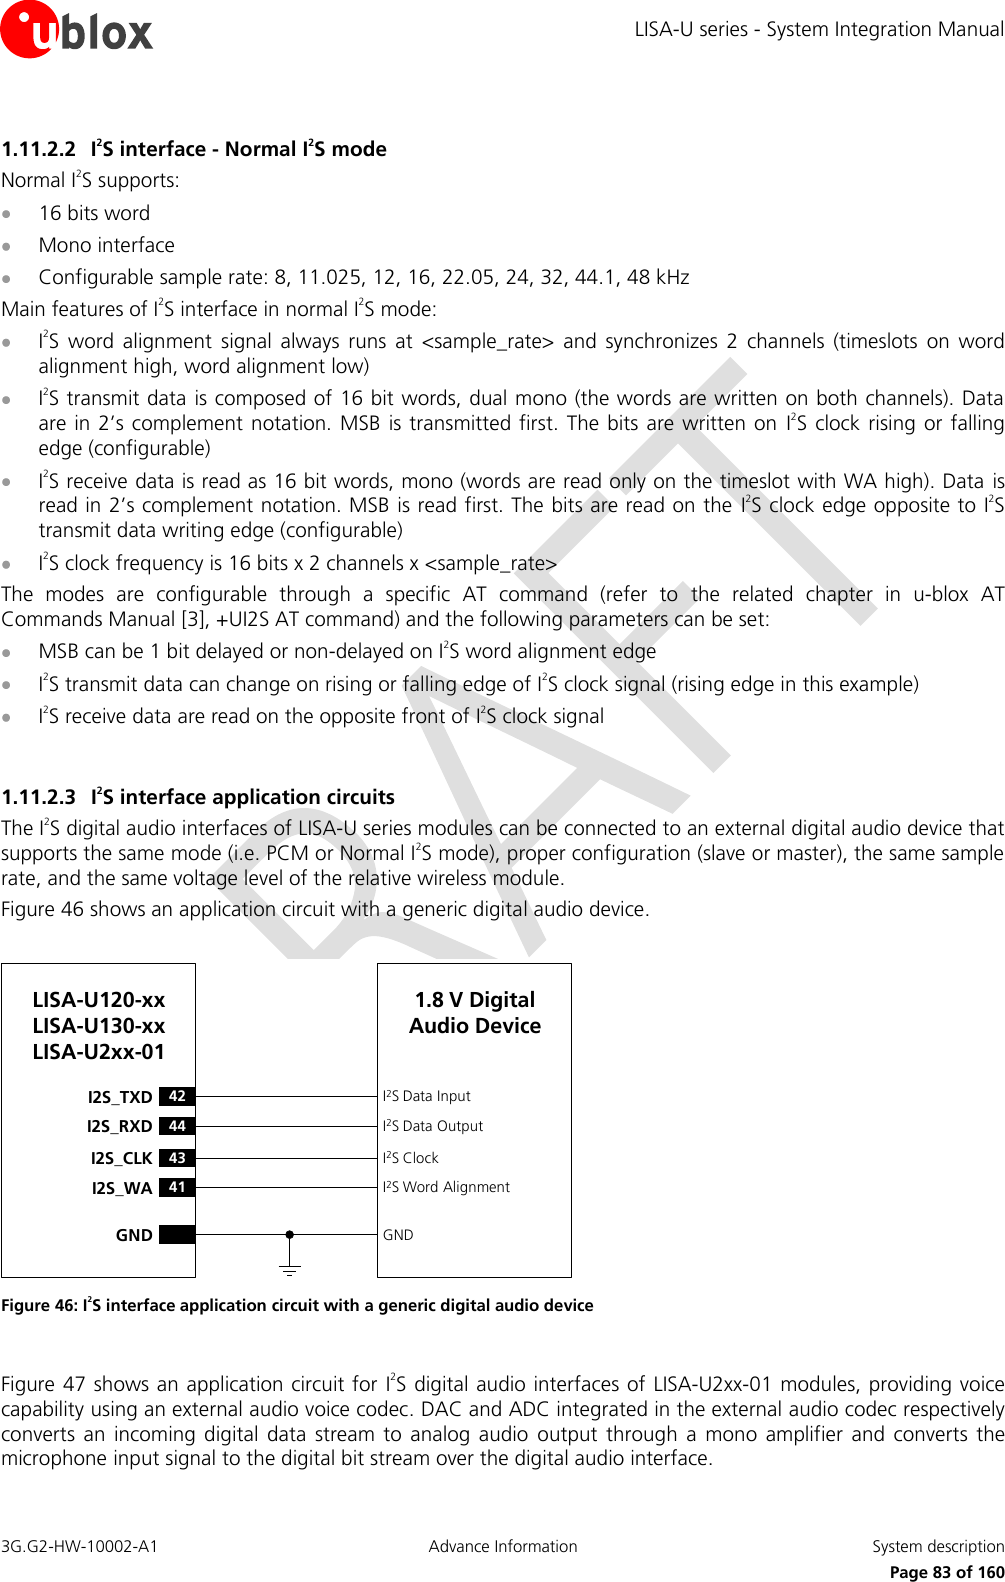 LISA-U series - System Integration Manual 3G.G2-HW-10002-A1  Advance Information  System description      Page 83 of 160 1.11.2.2 I2S interface - Normal I2S mode Normal I2S supports:  16 bits word  Mono interface  Configurable sample rate: 8, 11.025, 12, 16, 22.05, 24, 32, 44.1, 48 kHz Main features of I2S interface in normal I2S mode:  I2S  word  alignment  signal  always  runs  at  &lt;sample_rate&gt;  and  synchronizes  2  channels  (timeslots  on  word alignment high, word alignment low)  I2S transmit data  is composed of 16 bit words, dual mono (the words are written on both channels). Data are in 2’s complement notation. MSB  is transmitted first.  The bits are  written on  I2S clock rising  or falling edge (configurable)  I2S receive data is read as 16 bit words, mono (words are read only on the timeslot with WA high). Data  is read in 2’s complement notation. MSB is read first. The bits are read on the  I2S clock edge opposite to I2S transmit data writing edge (configurable)  I2S clock frequency is 16 bits x 2 channels x &lt;sample_rate&gt; The  modes  are  configurable  through  a  specific  AT  command  (refer  to  the  related  chapter  in  u-blox  AT Commands Manual [3], +UI2S AT command) and the following parameters can be set:  MSB can be 1 bit delayed or non-delayed on I2S word alignment edge  I2S transmit data can change on rising or falling edge of I2S clock signal (rising edge in this example)  I2S receive data are read on the opposite front of I2S clock signal  1.11.2.3 I2S interface application circuits The I2S digital audio interfaces of LISA-U series modules can be connected to an external digital audio device that supports the same mode (i.e. PCM or Normal I2S mode), proper configuration (slave or master), the same sample rate, and the same voltage level of the relative wireless module. Figure 46 shows an application circuit with a generic digital audio device.  43I2S_CLK41I2S_WAI2S ClockI2S Word AlignmentLISA-U120-xxLISA-U130-xxLISA-U2xx-0142I2S_TXD44I2S_RXDI2S Data InputI2S Data OutputGND GND1.8 V Digital Audio Device Figure 46: I2S interface application circuit with a generic digital audio device  Figure 47 shows an application circuit for  I2S digital audio interfaces of LISA-U2xx-01 modules, providing voice capability using an external audio voice codec. DAC and ADC integrated in the external audio codec respectively converts  an  incoming digital  data stream to  analog  audio  output  through  a mono  amplifier  and converts  the microphone input signal to the digital bit stream over the digital audio interface. 